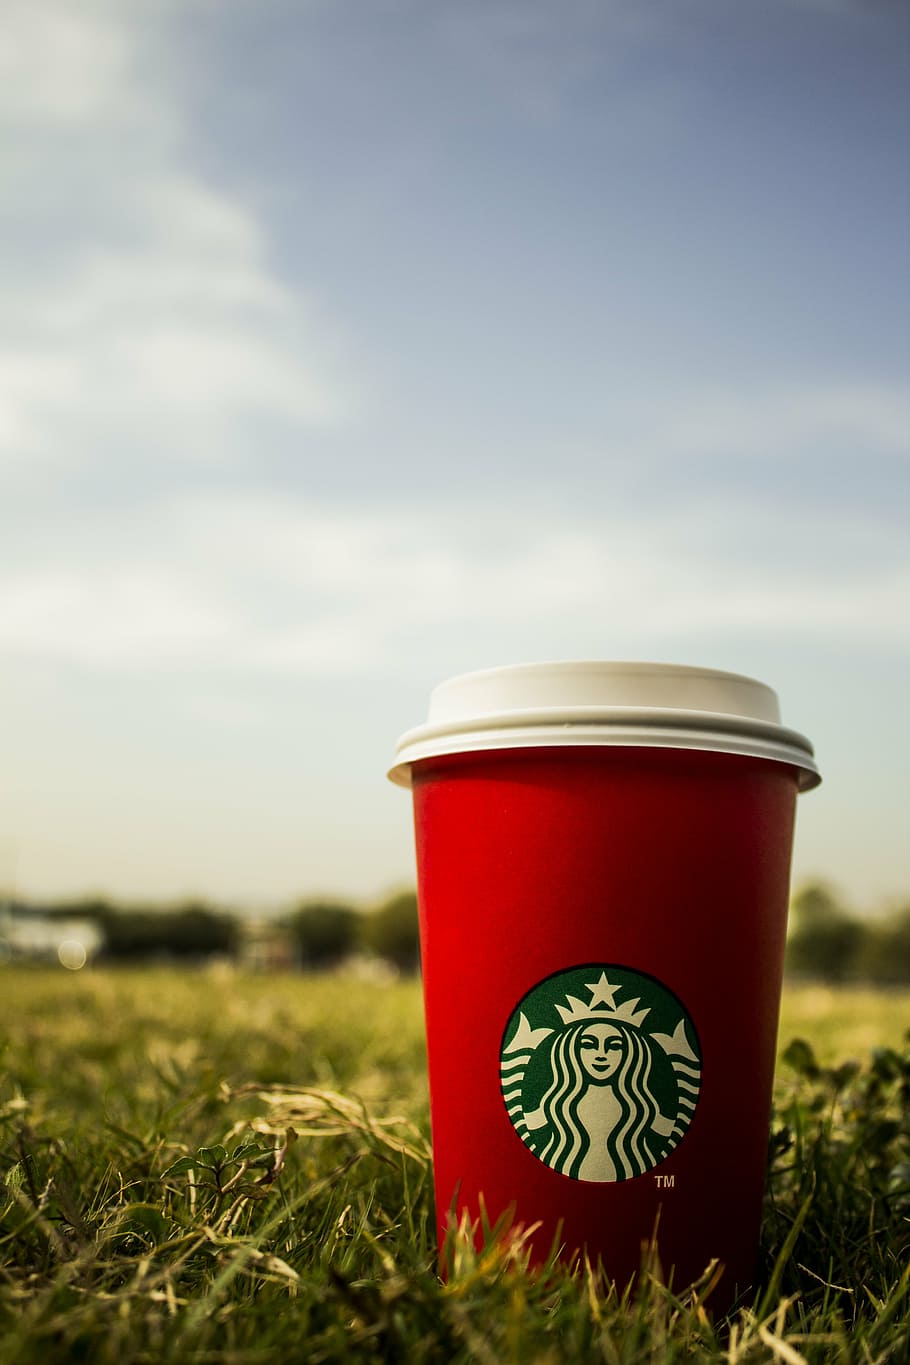 starbucks cup, grass, starbucks, coffee, lawn, christmas, red, sky, logo, agriculture